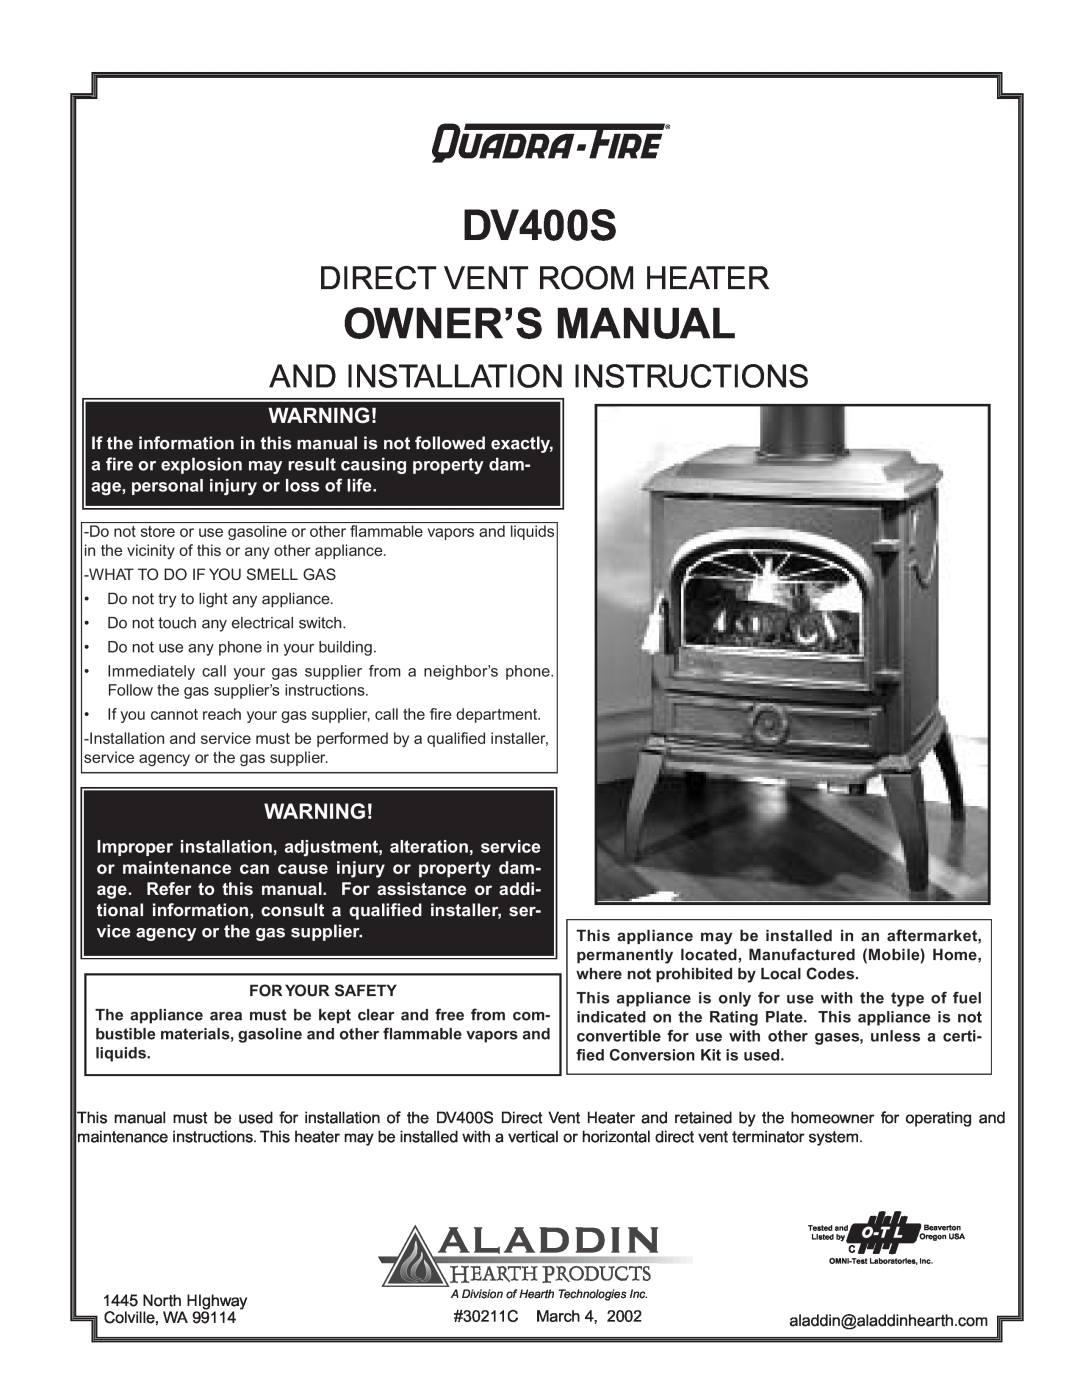 Quadra-Fire DV400S owner manual Direct Vent Room Heater, And Installation Instructions 